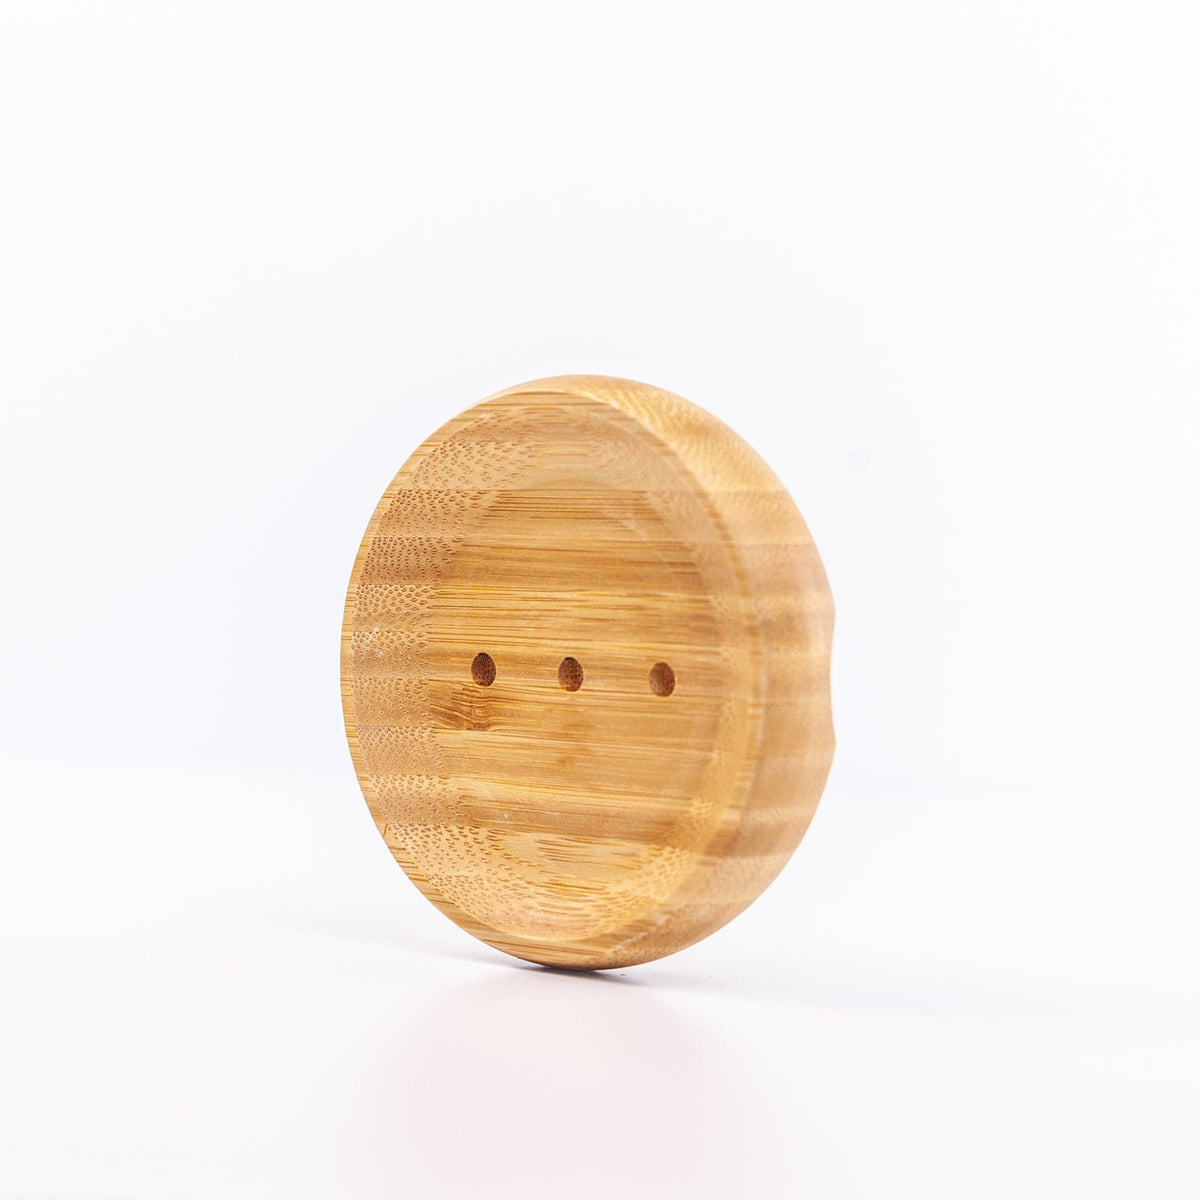 Round Wooden Soap Dish